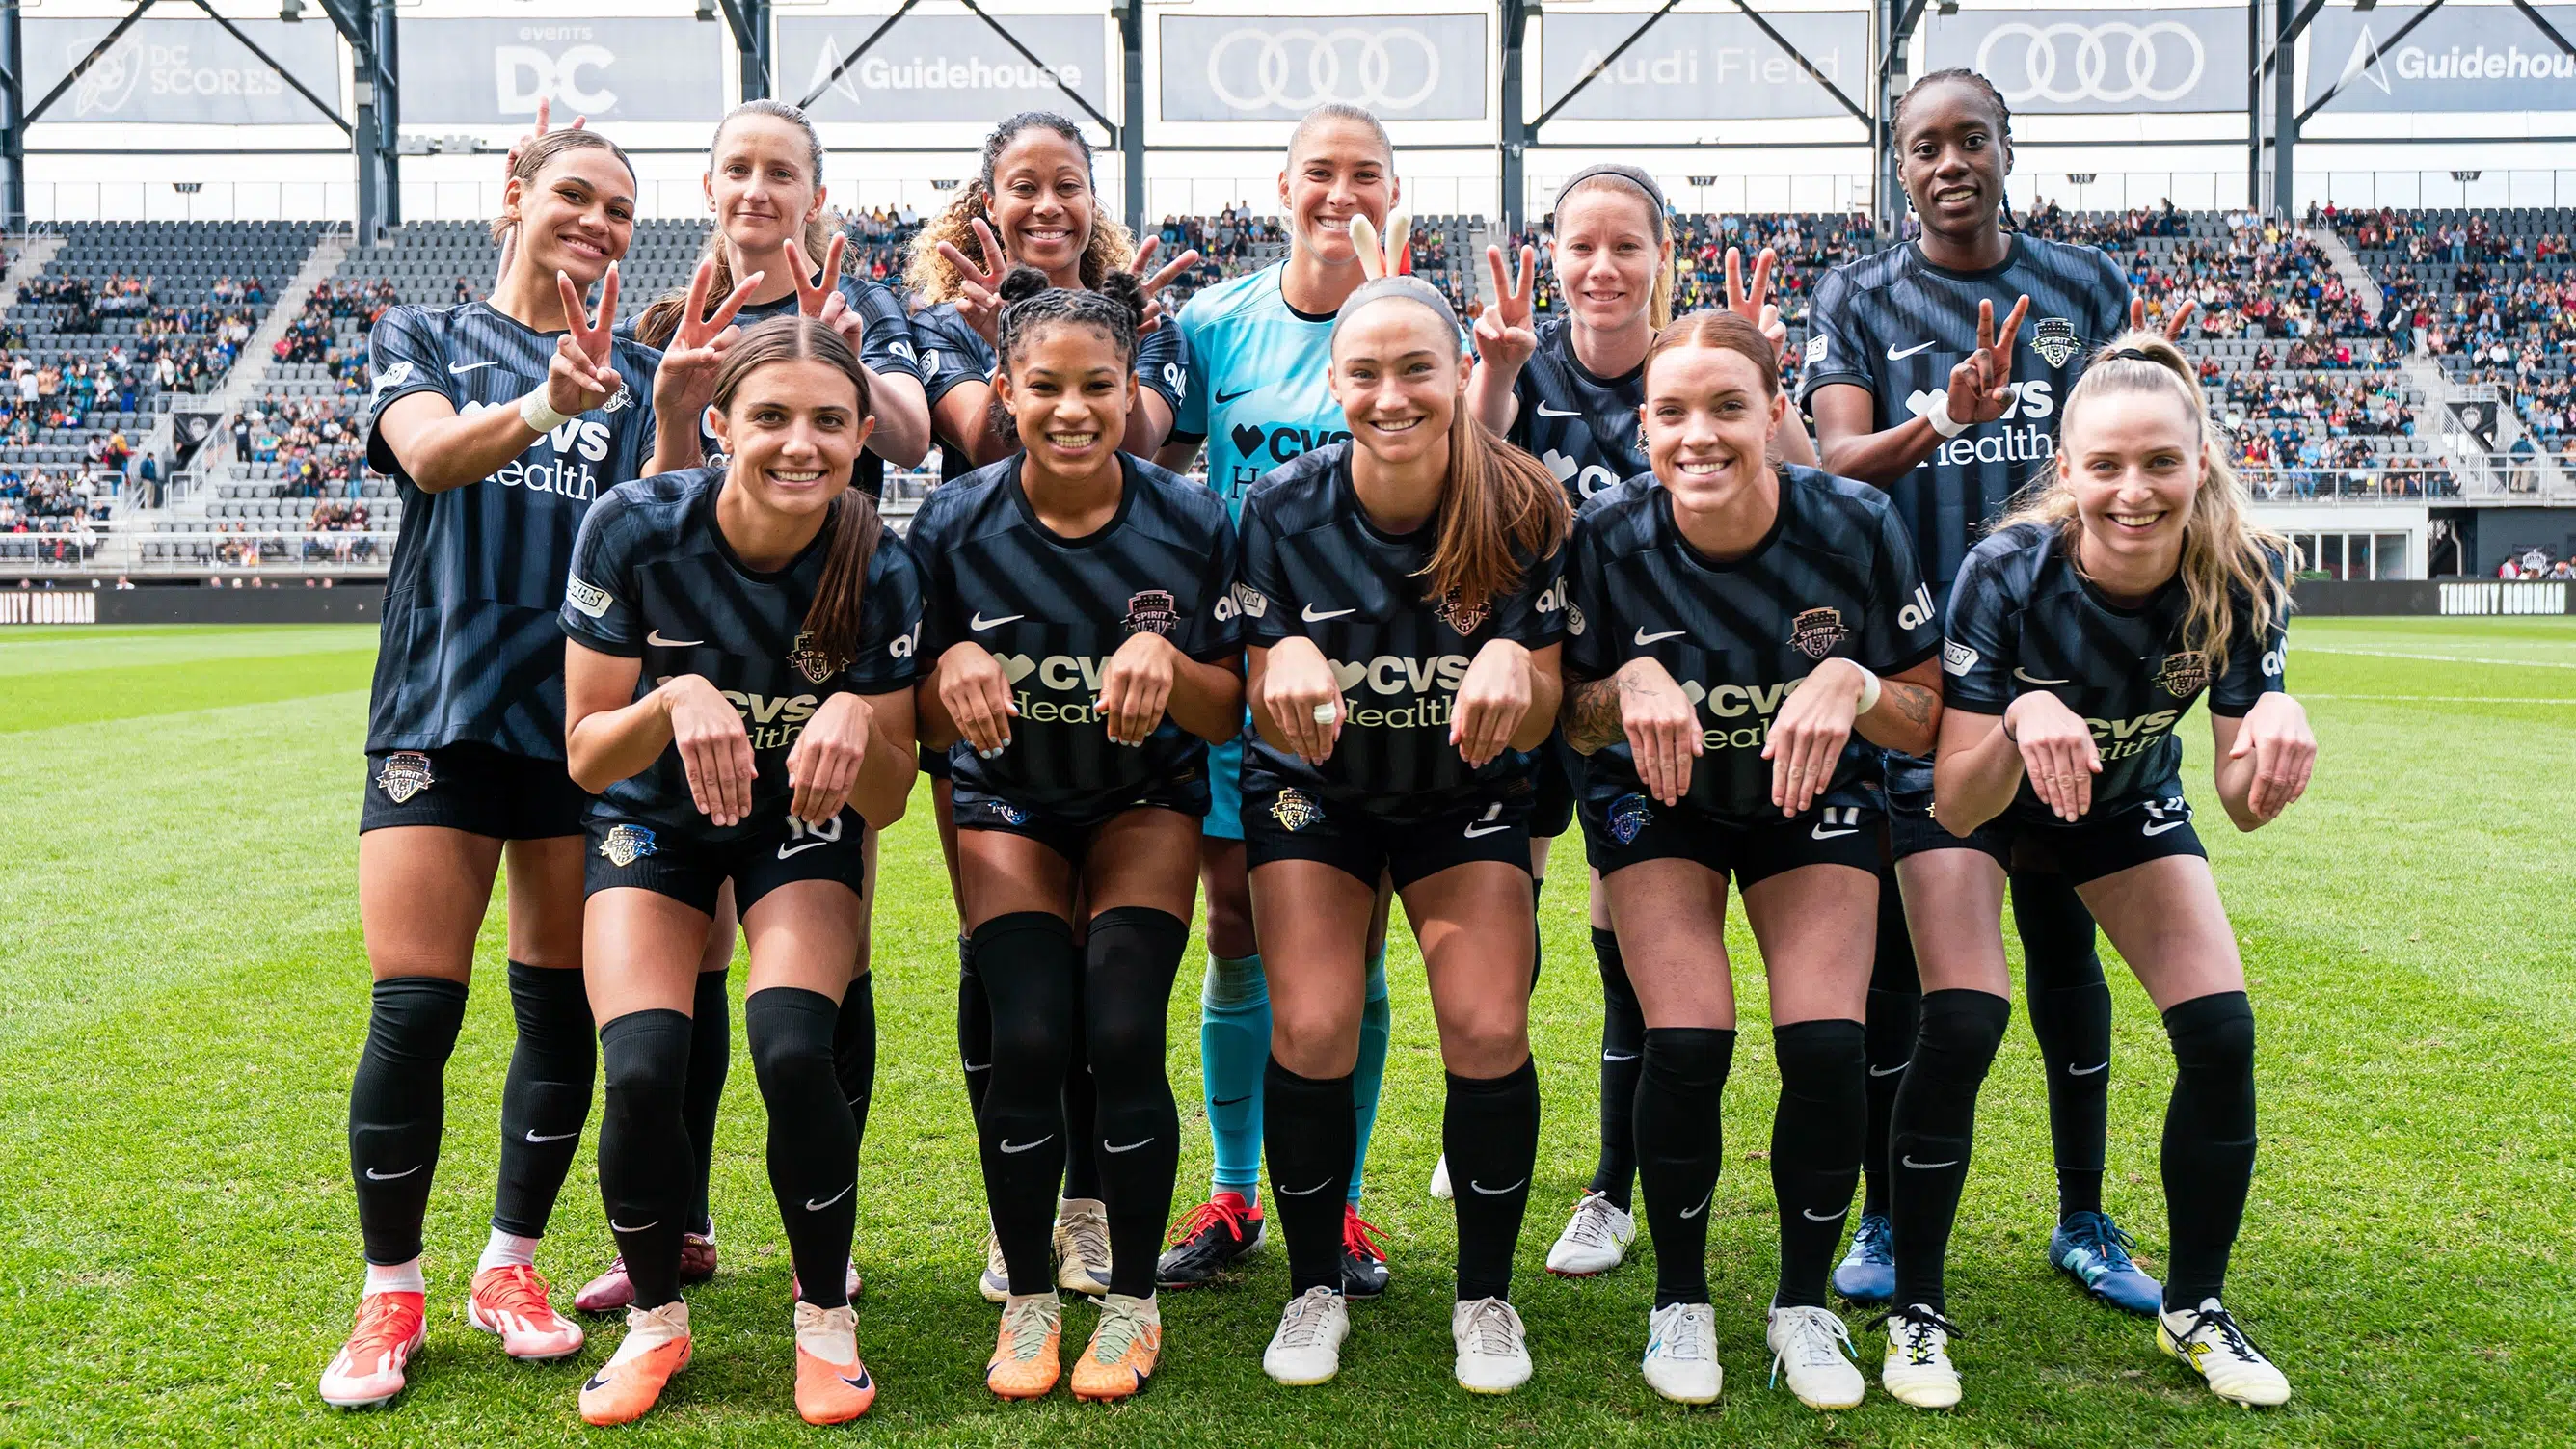 The starting eleven of the Washington Spirit pose in two rows. The first row has their hands posed like paws, and the back row puts "bunny ears" on the women in front.